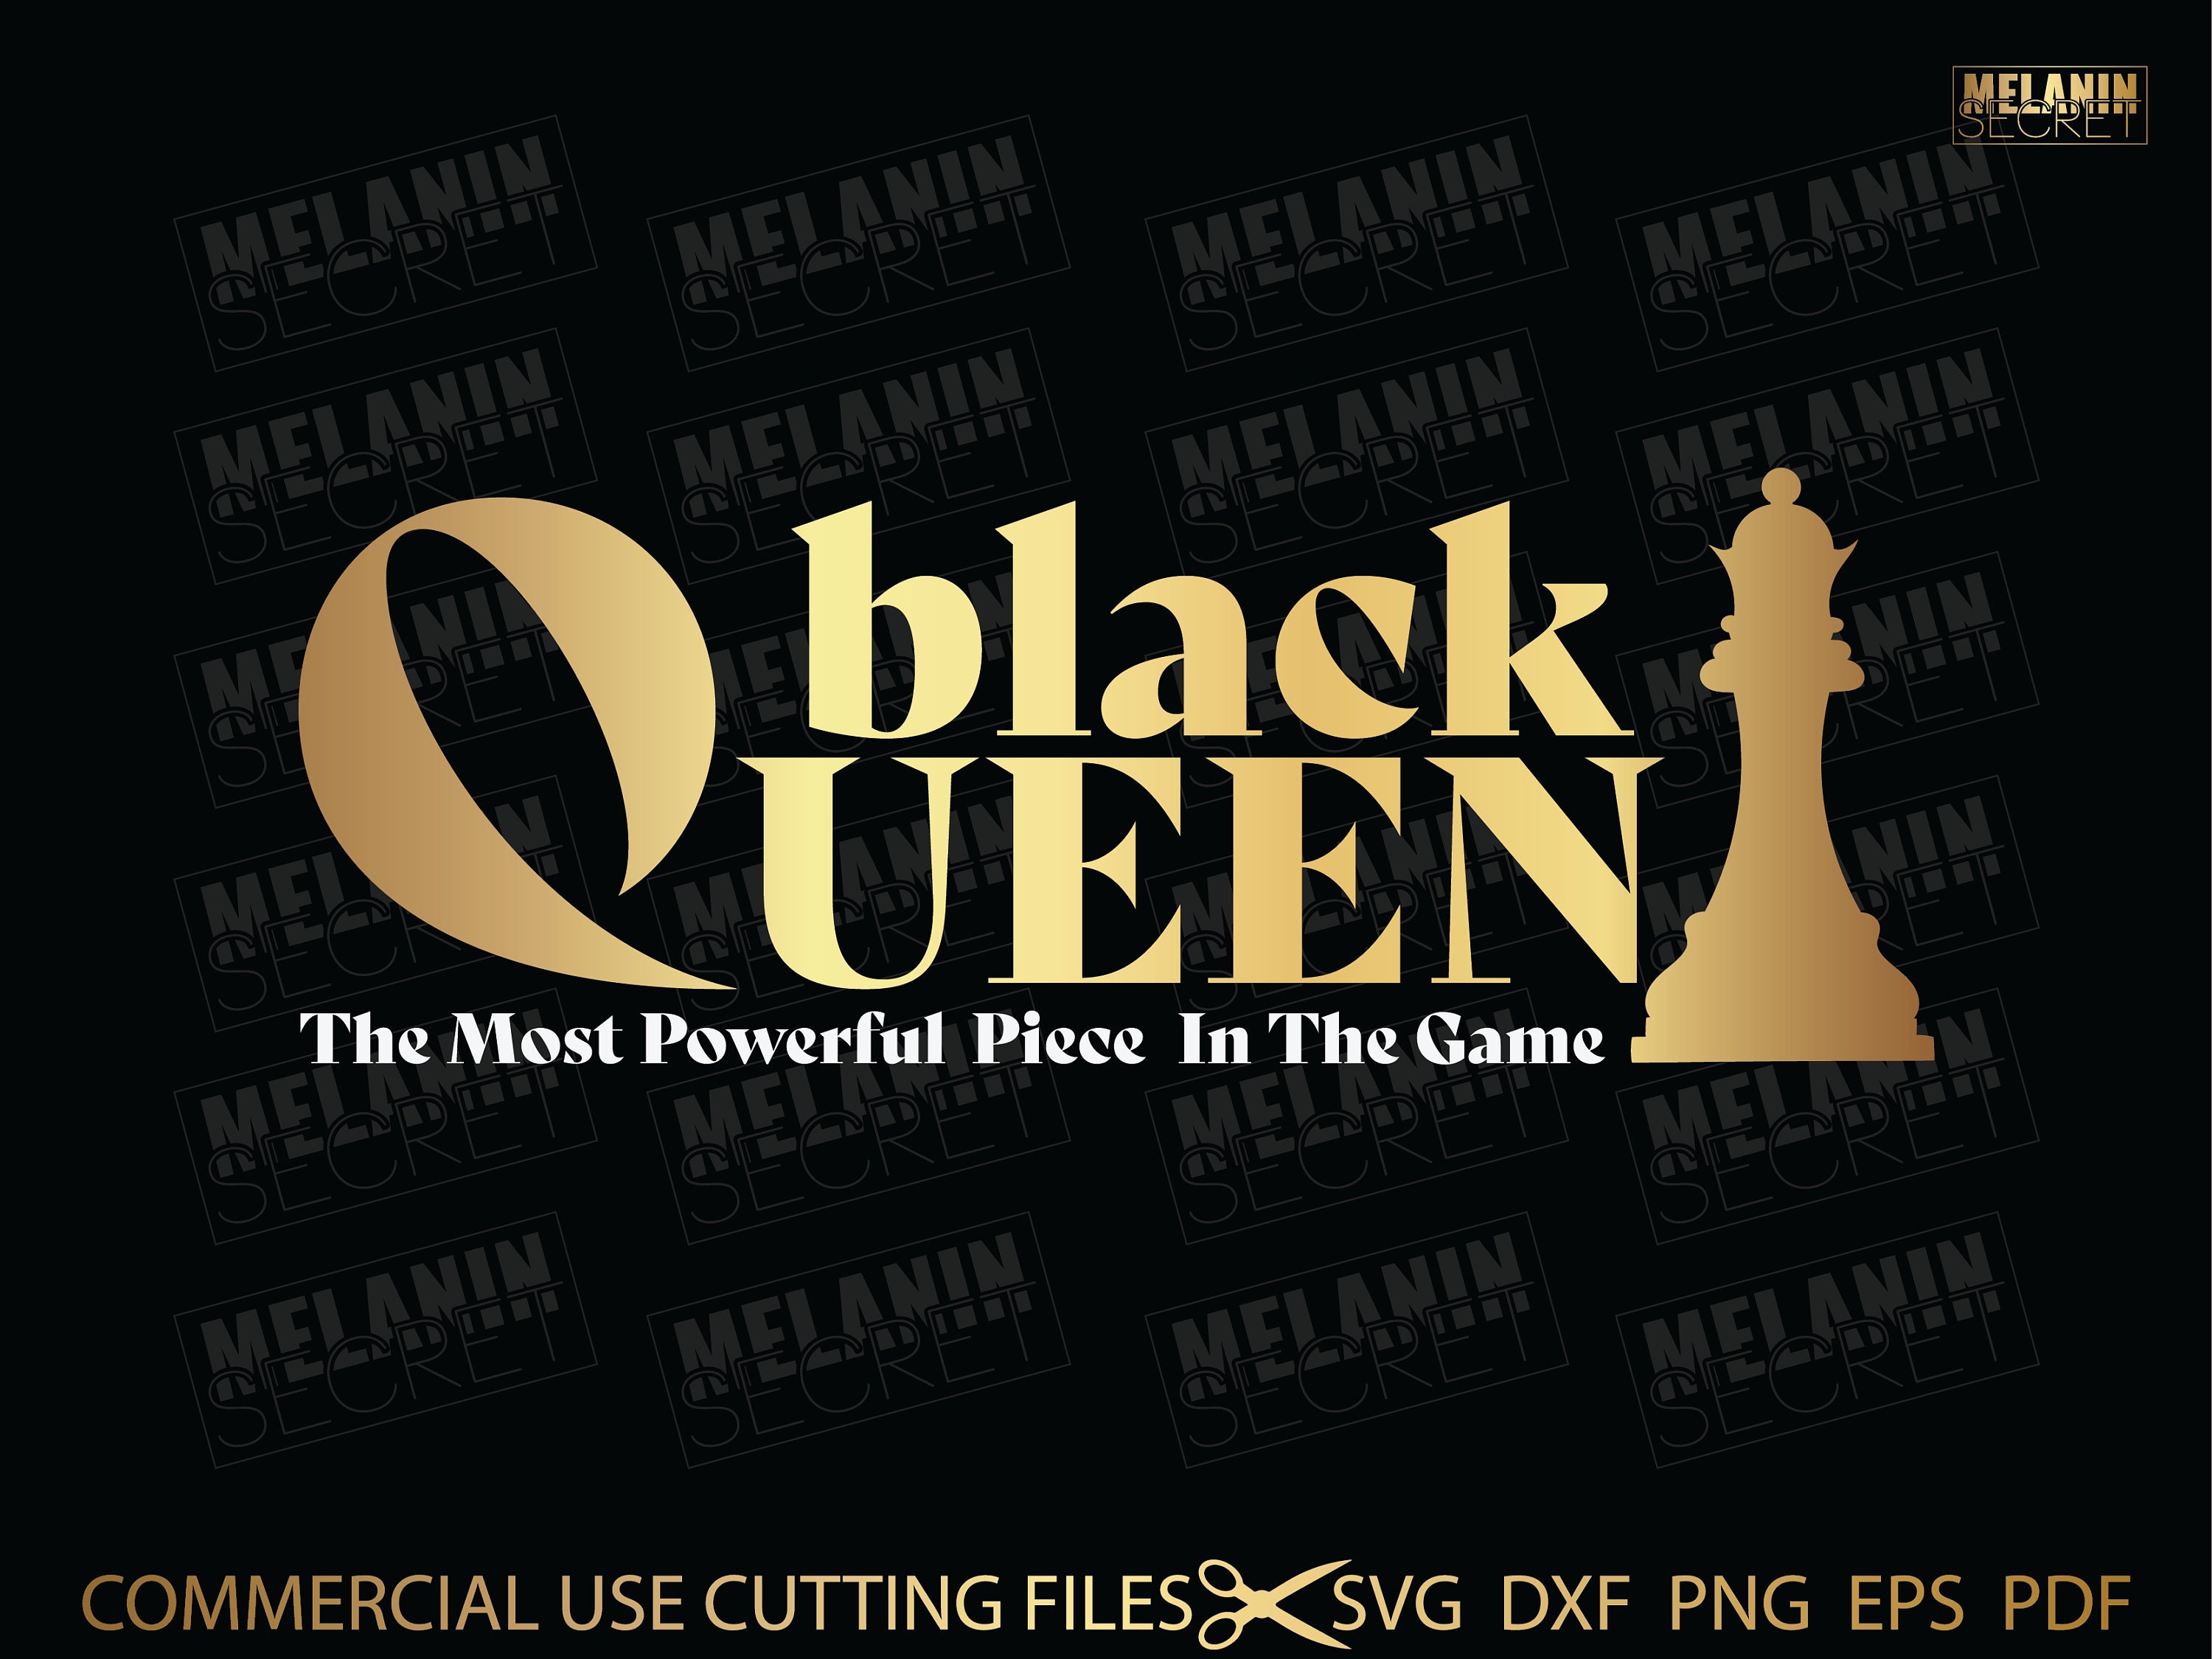 Black Queen Most Powerful Piece In The Game Chess Poster